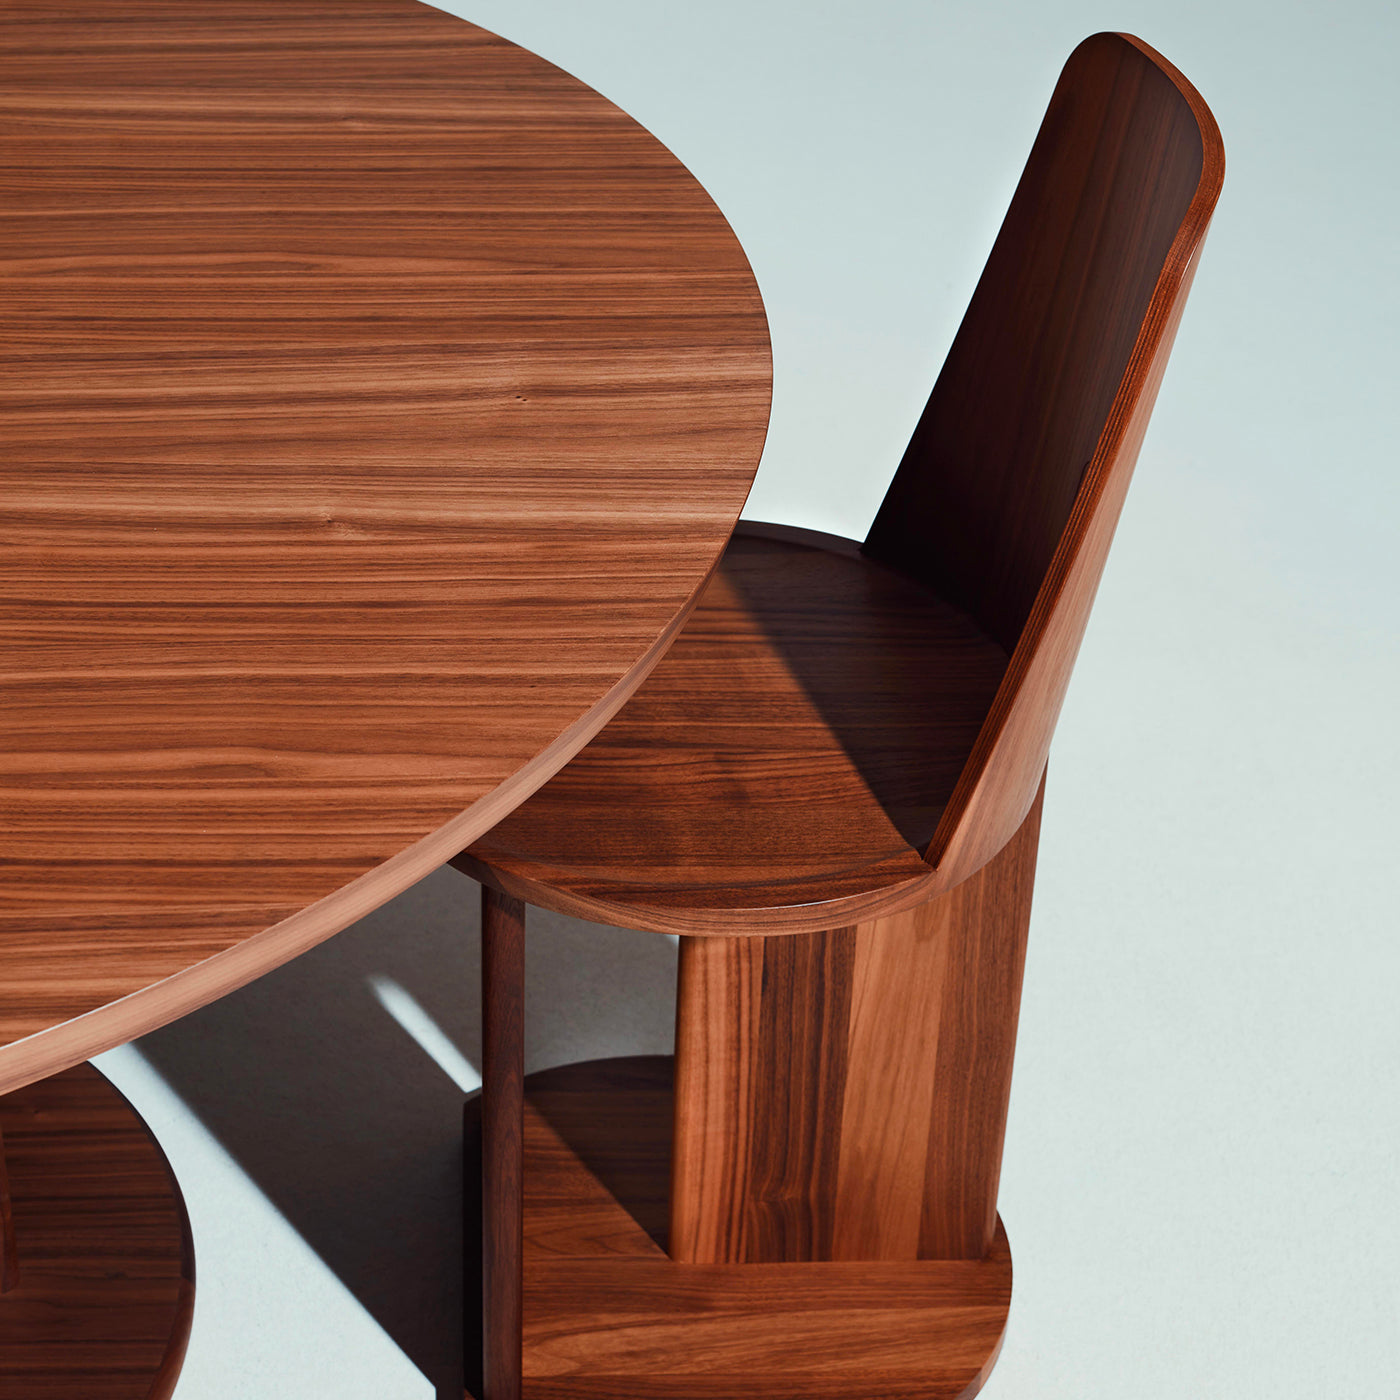 Intersection Round Dining Table by Neri&Hu - Alternative view 1